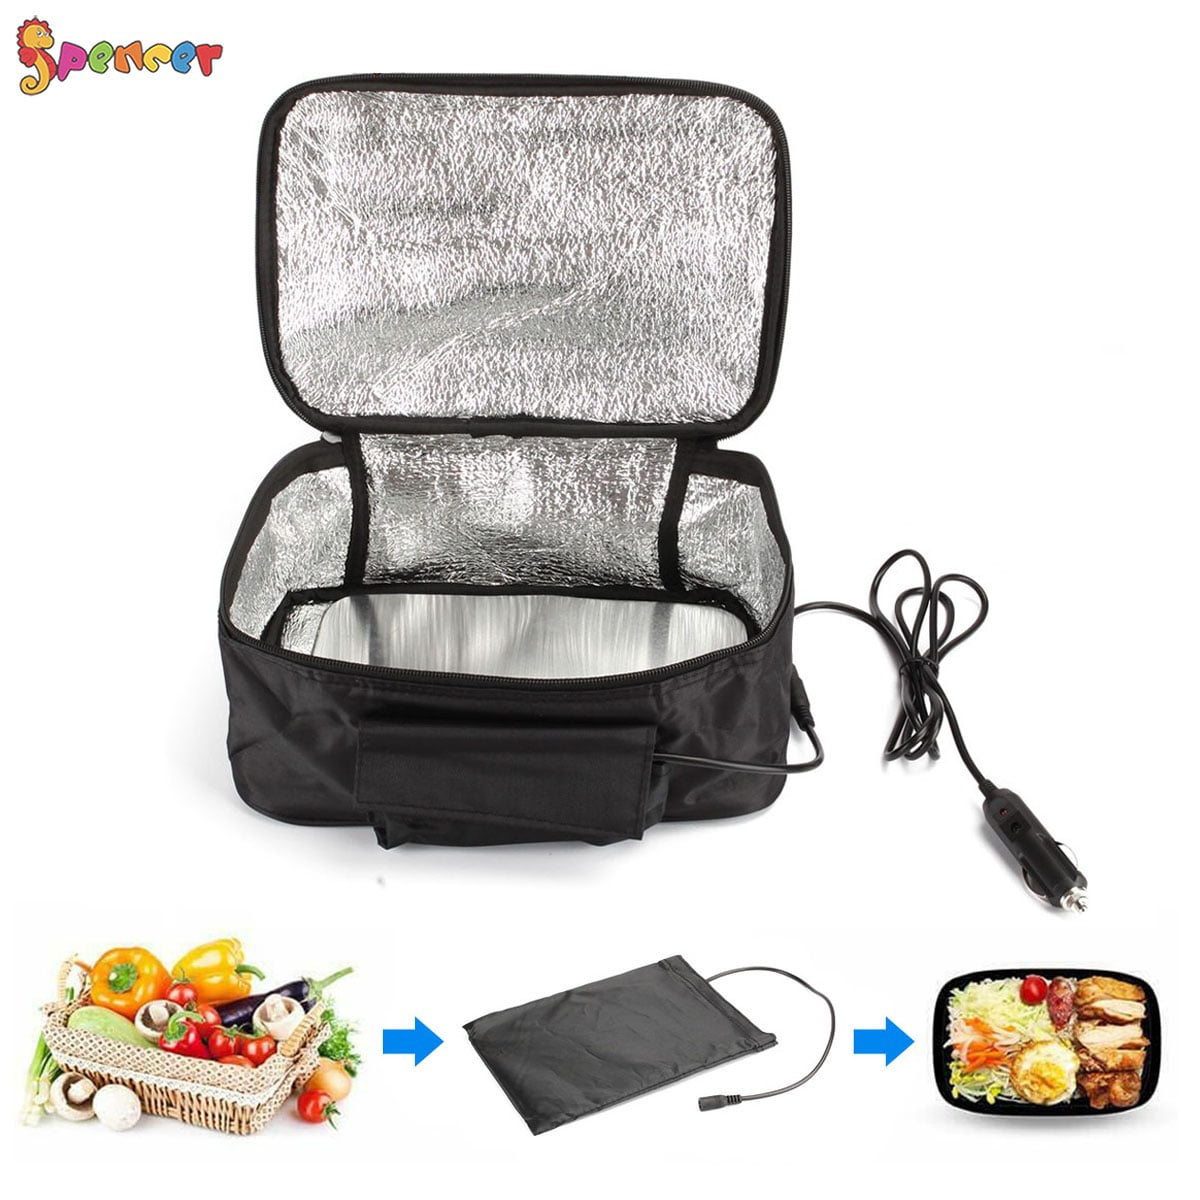 US/EU/Car Lighter Plug Electric Mini Portable Lunch Bag Oven Instant Food  Heater Heating Warmer Heating Lunch Bag Car Home Lunch Box Warmer Heating